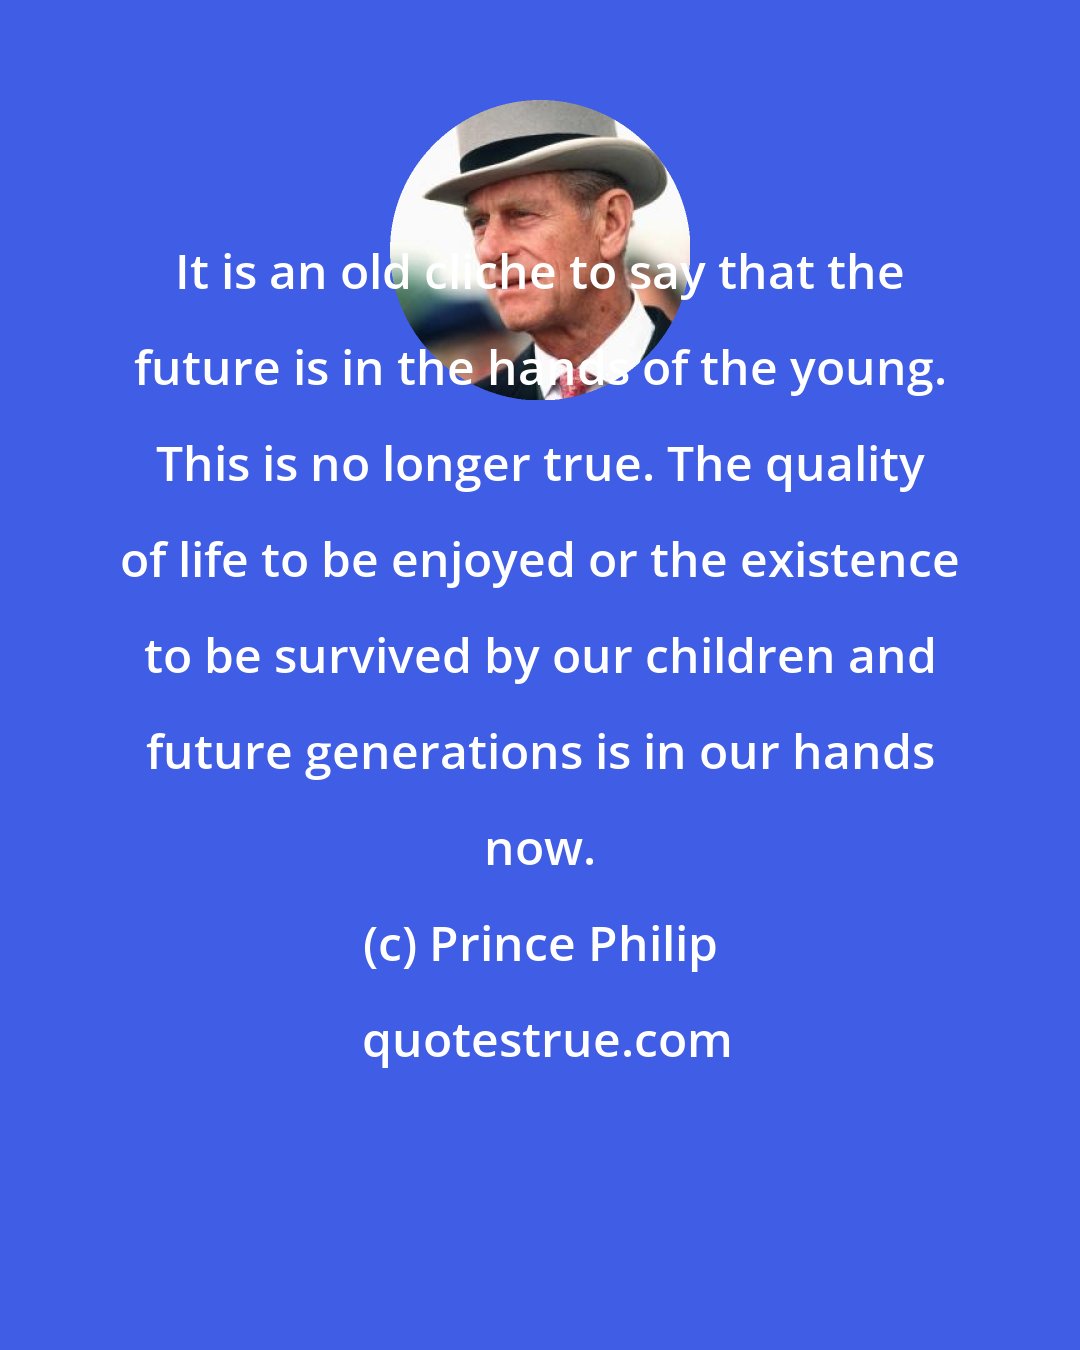 Prince Philip: It is an old cliche to say that the future is in the hands of the young. This is no longer true. The quality of life to be enjoyed or the existence to be survived by our children and future generations is in our hands now.